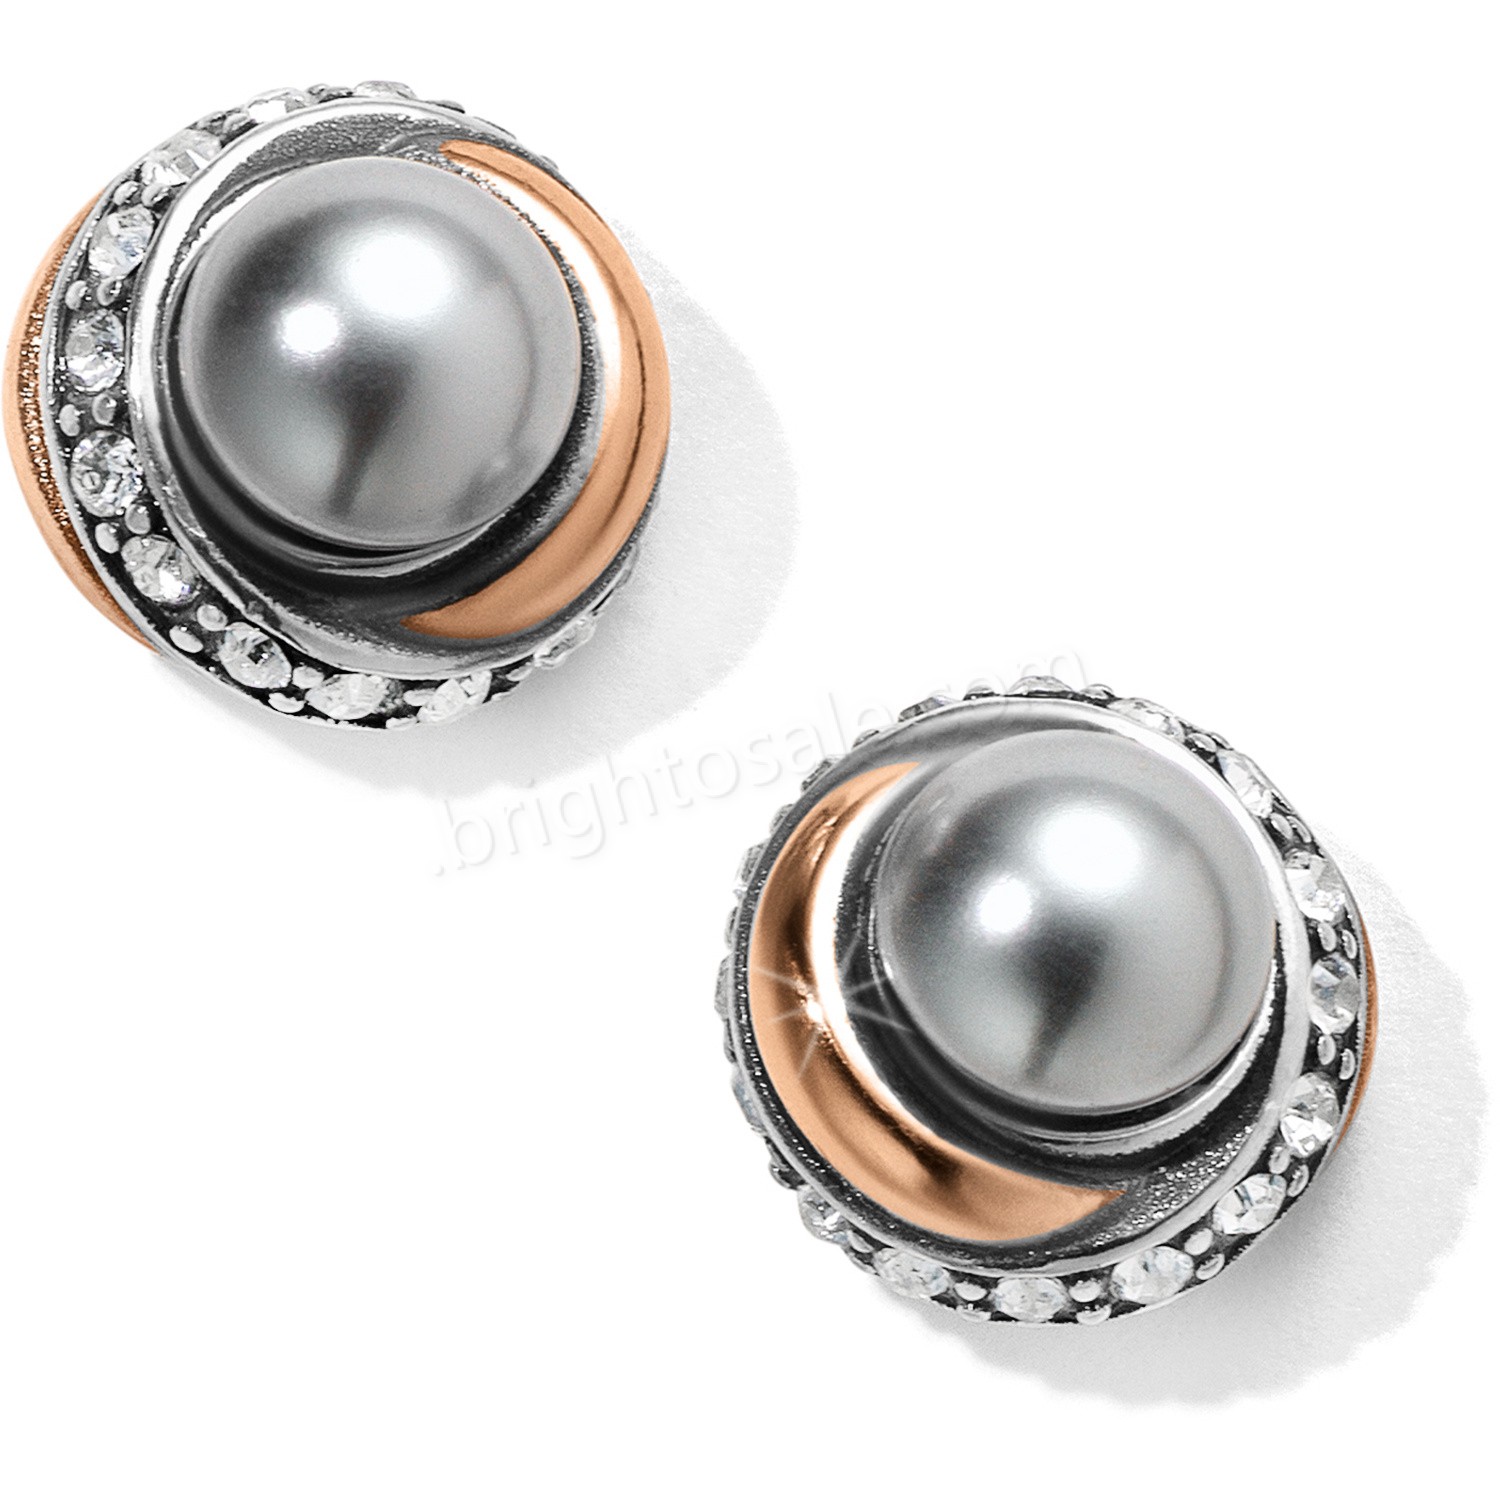 Brighton Collectibles & Online Discount Neptune's Rings Gray Pearl Button Earrings - Brighton Collectibles & Online Discount Neptune's Rings Gray Pearl Button Earrings